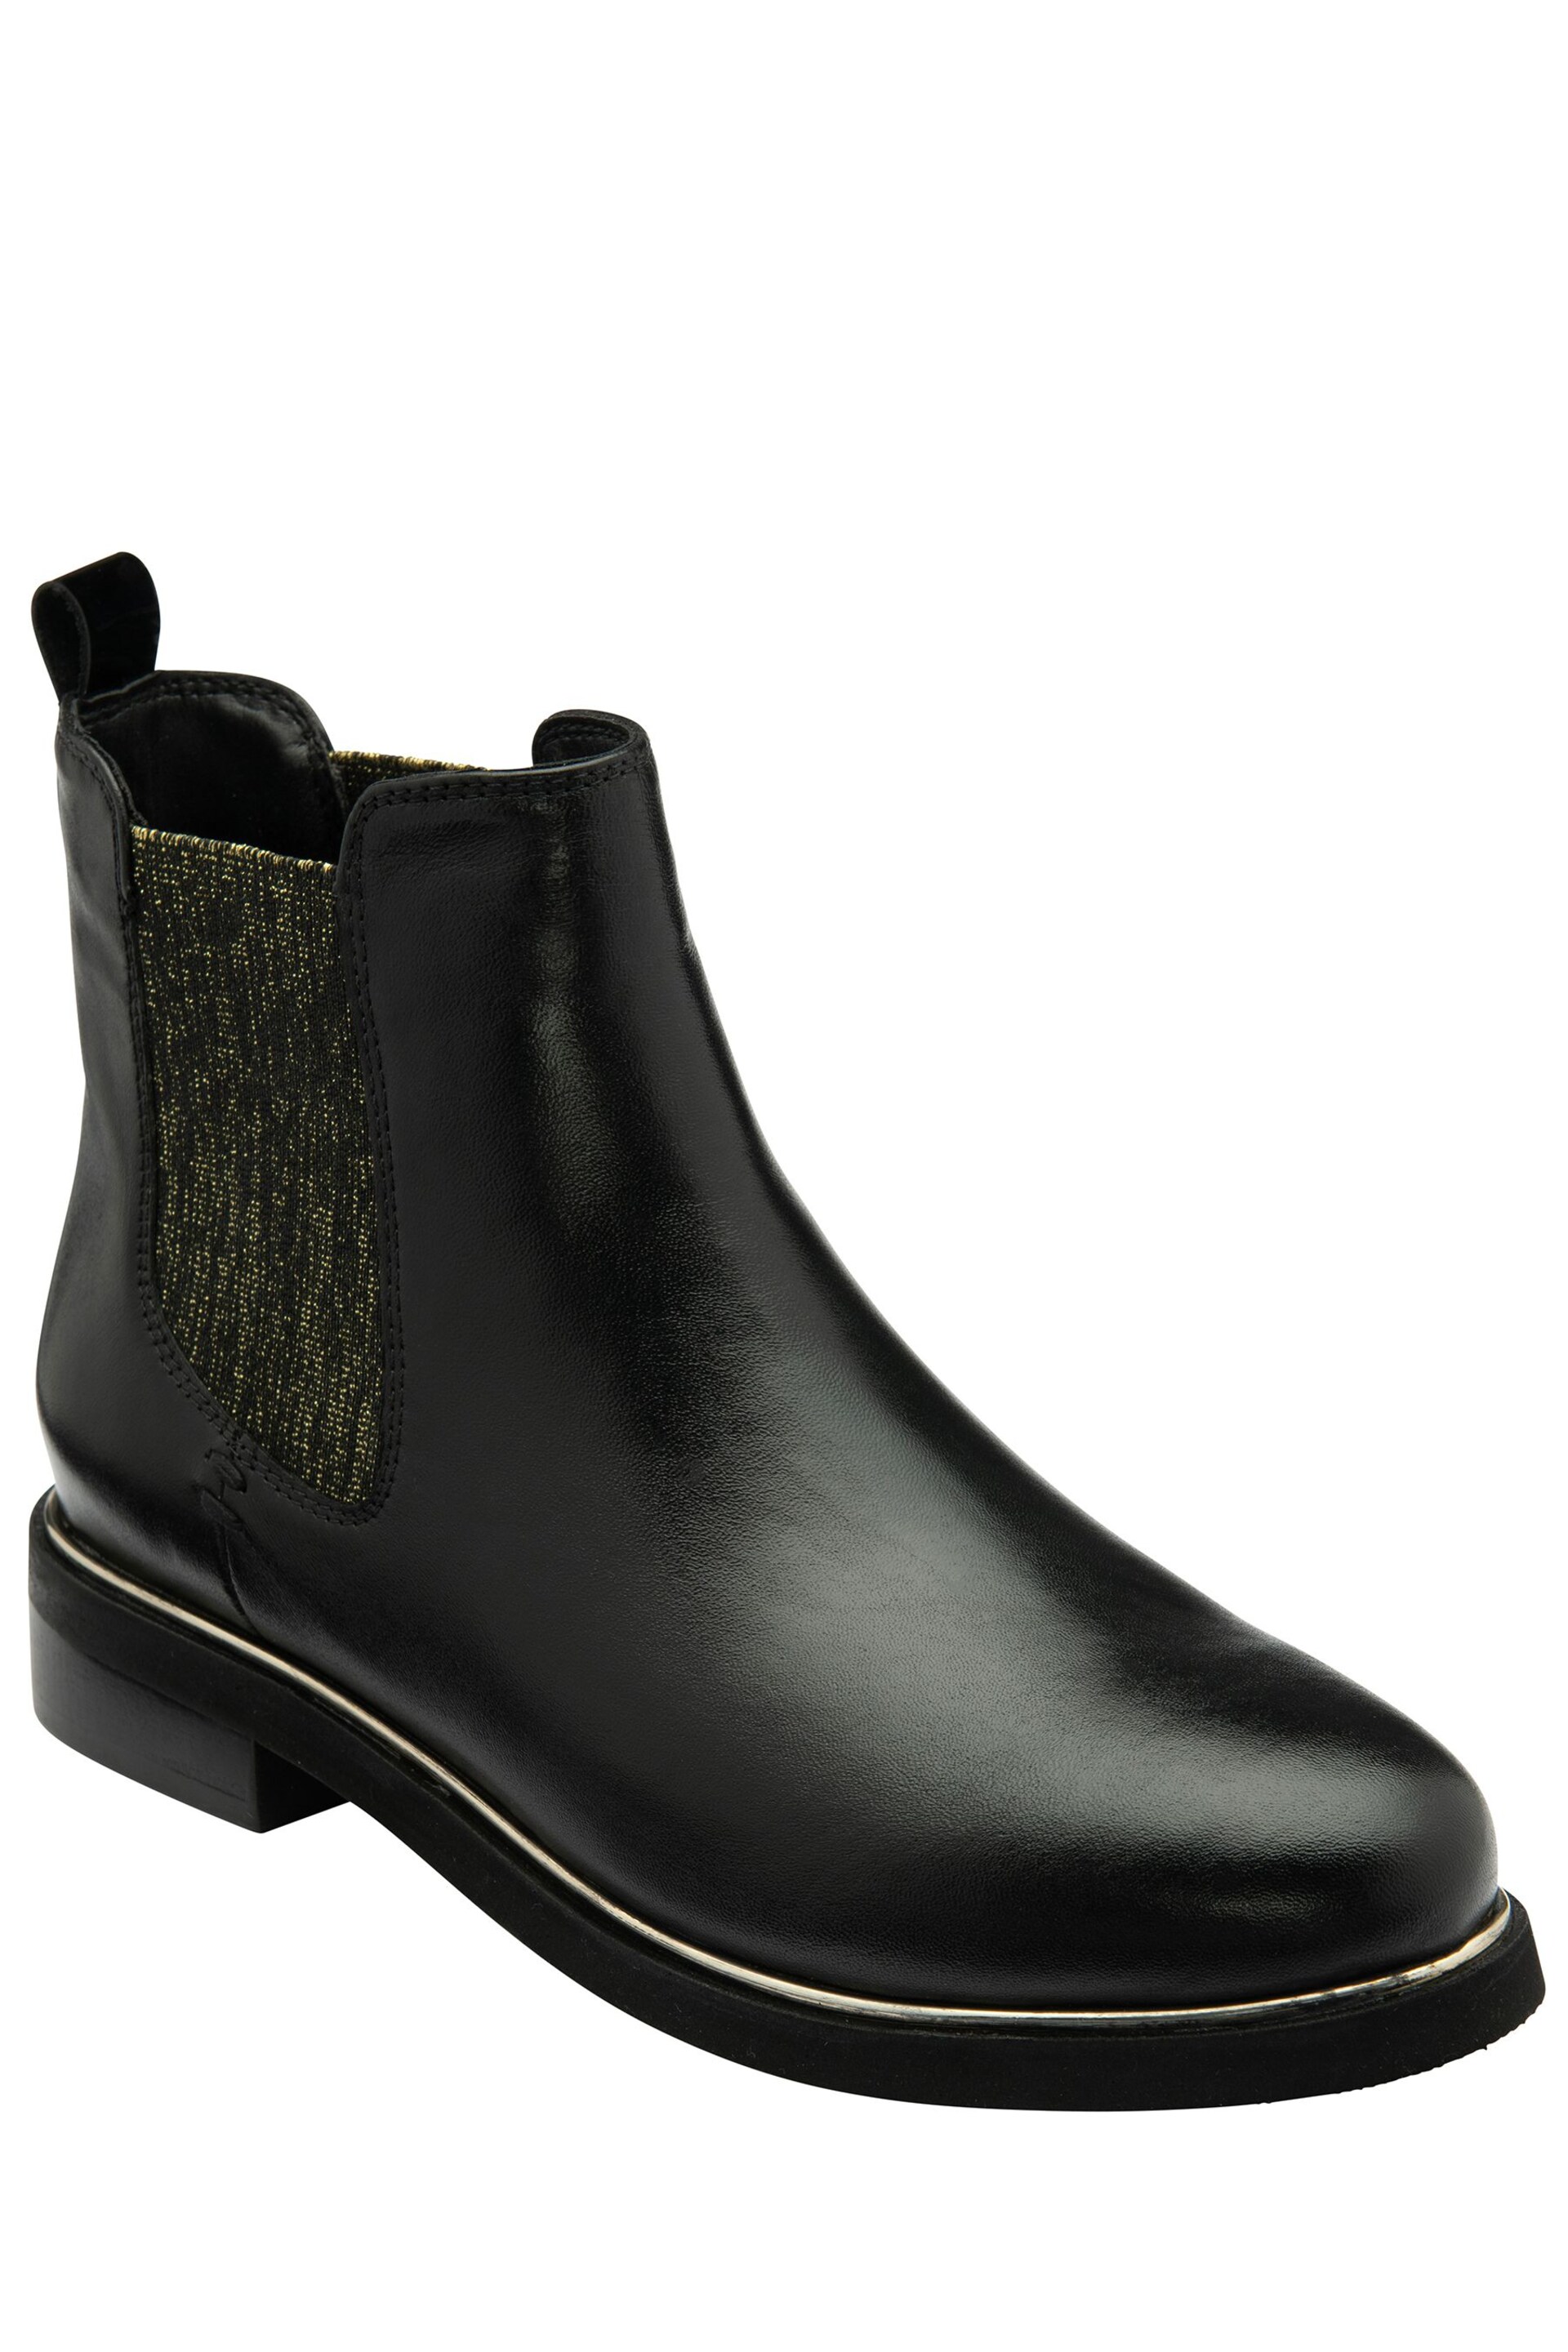 Lotus Black Ankle Boots - Image 1 of 4